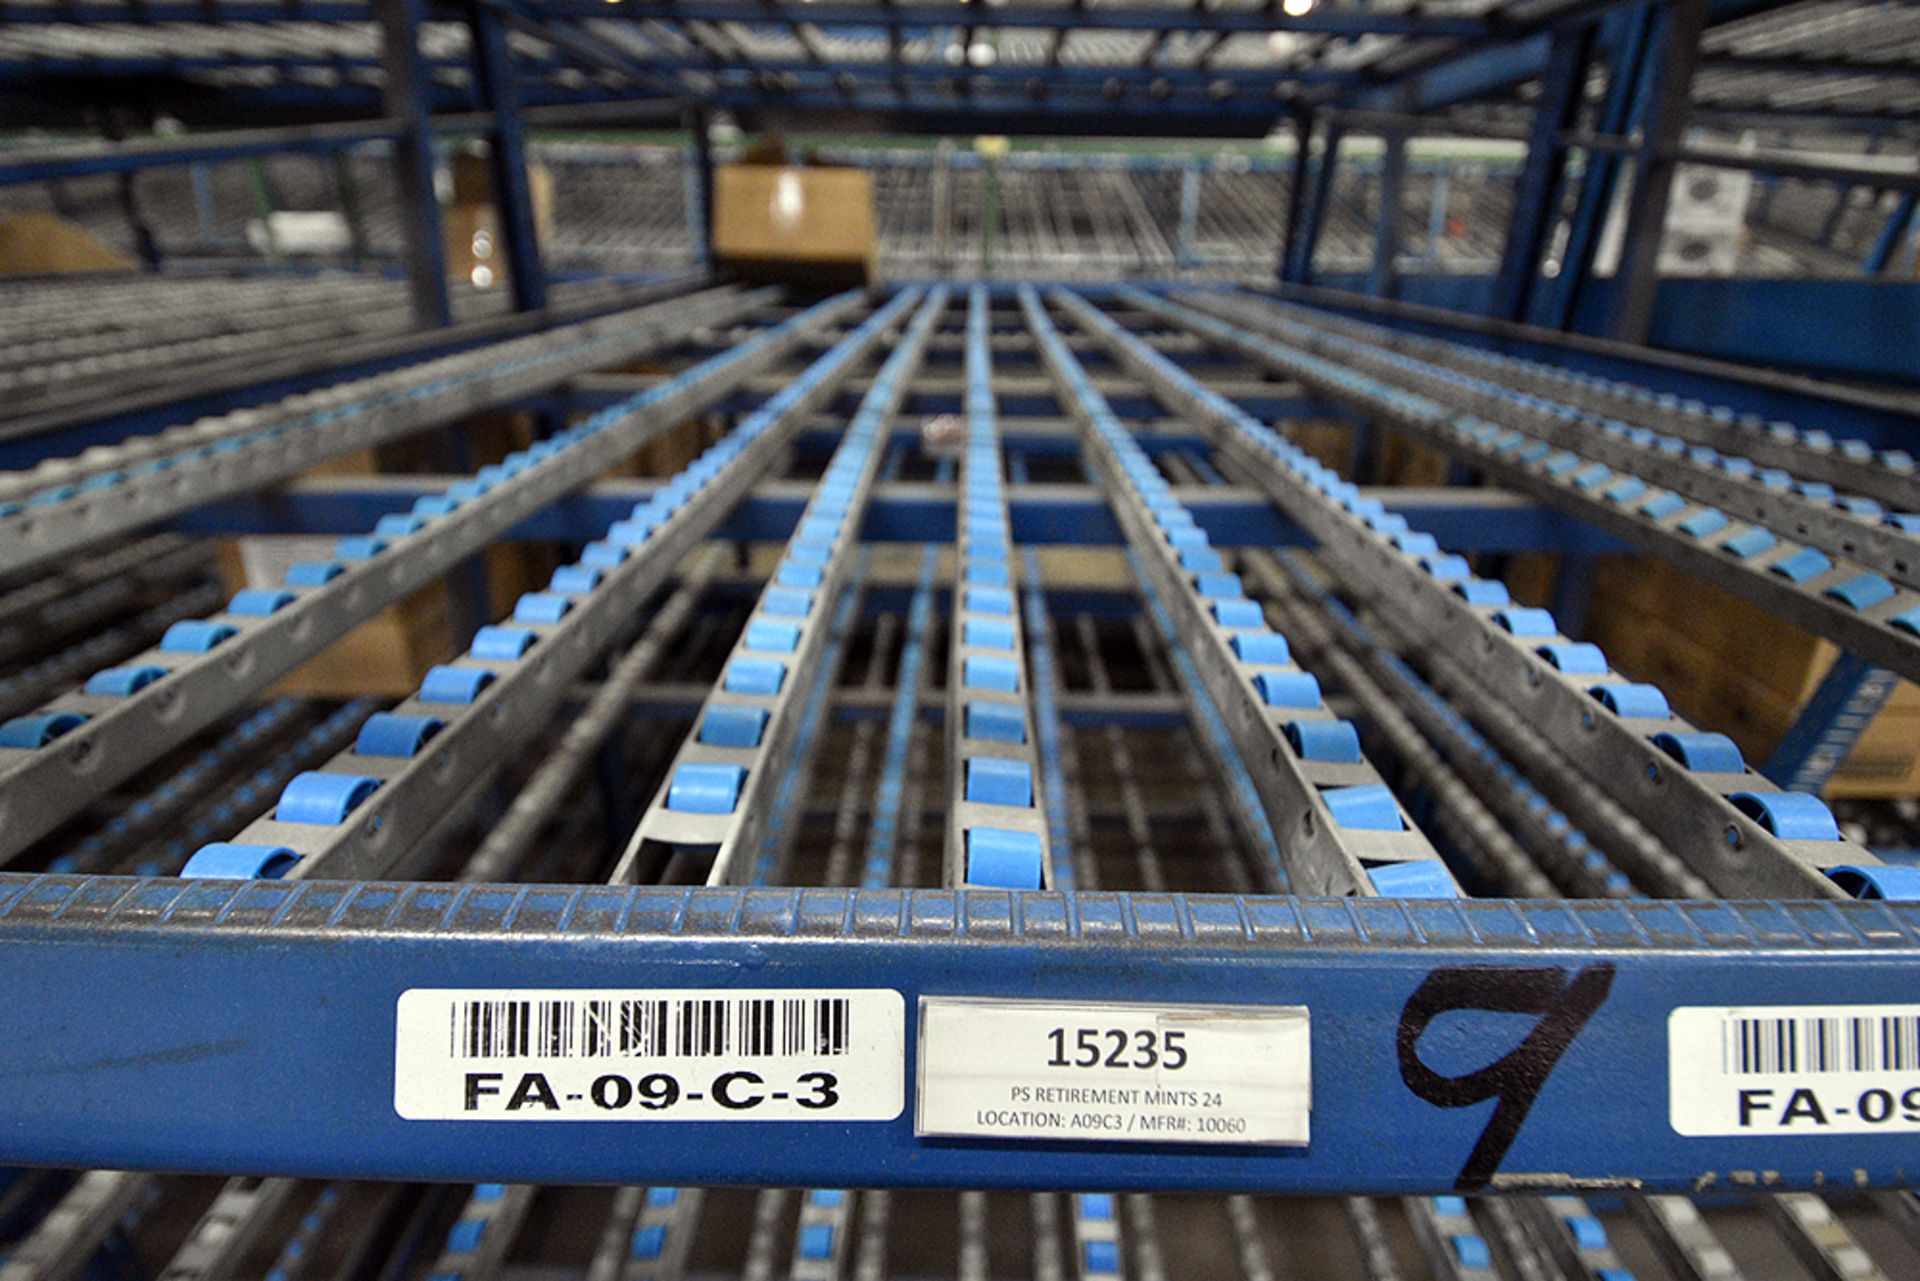 4-Tier Gravity Fed, Carton Flow Rack(132"x601.5"x95"H) (108"x1" Rollers) - Image 2 of 3